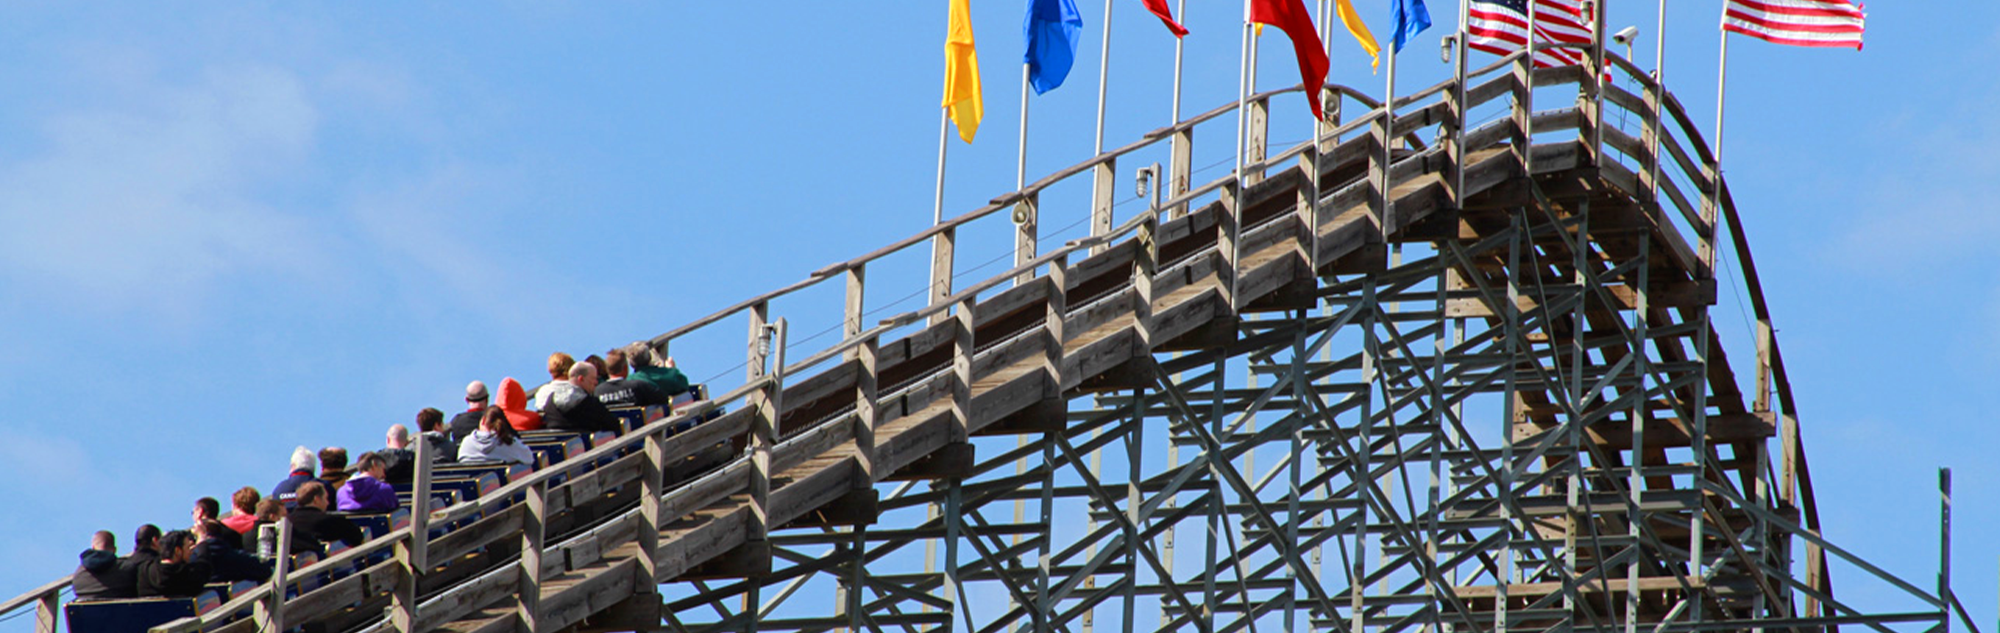 A train on The Voyage roller coaster is seen climbing the lift hill. It heads to the right as you can see colored flags and the American flag waving in the wind.